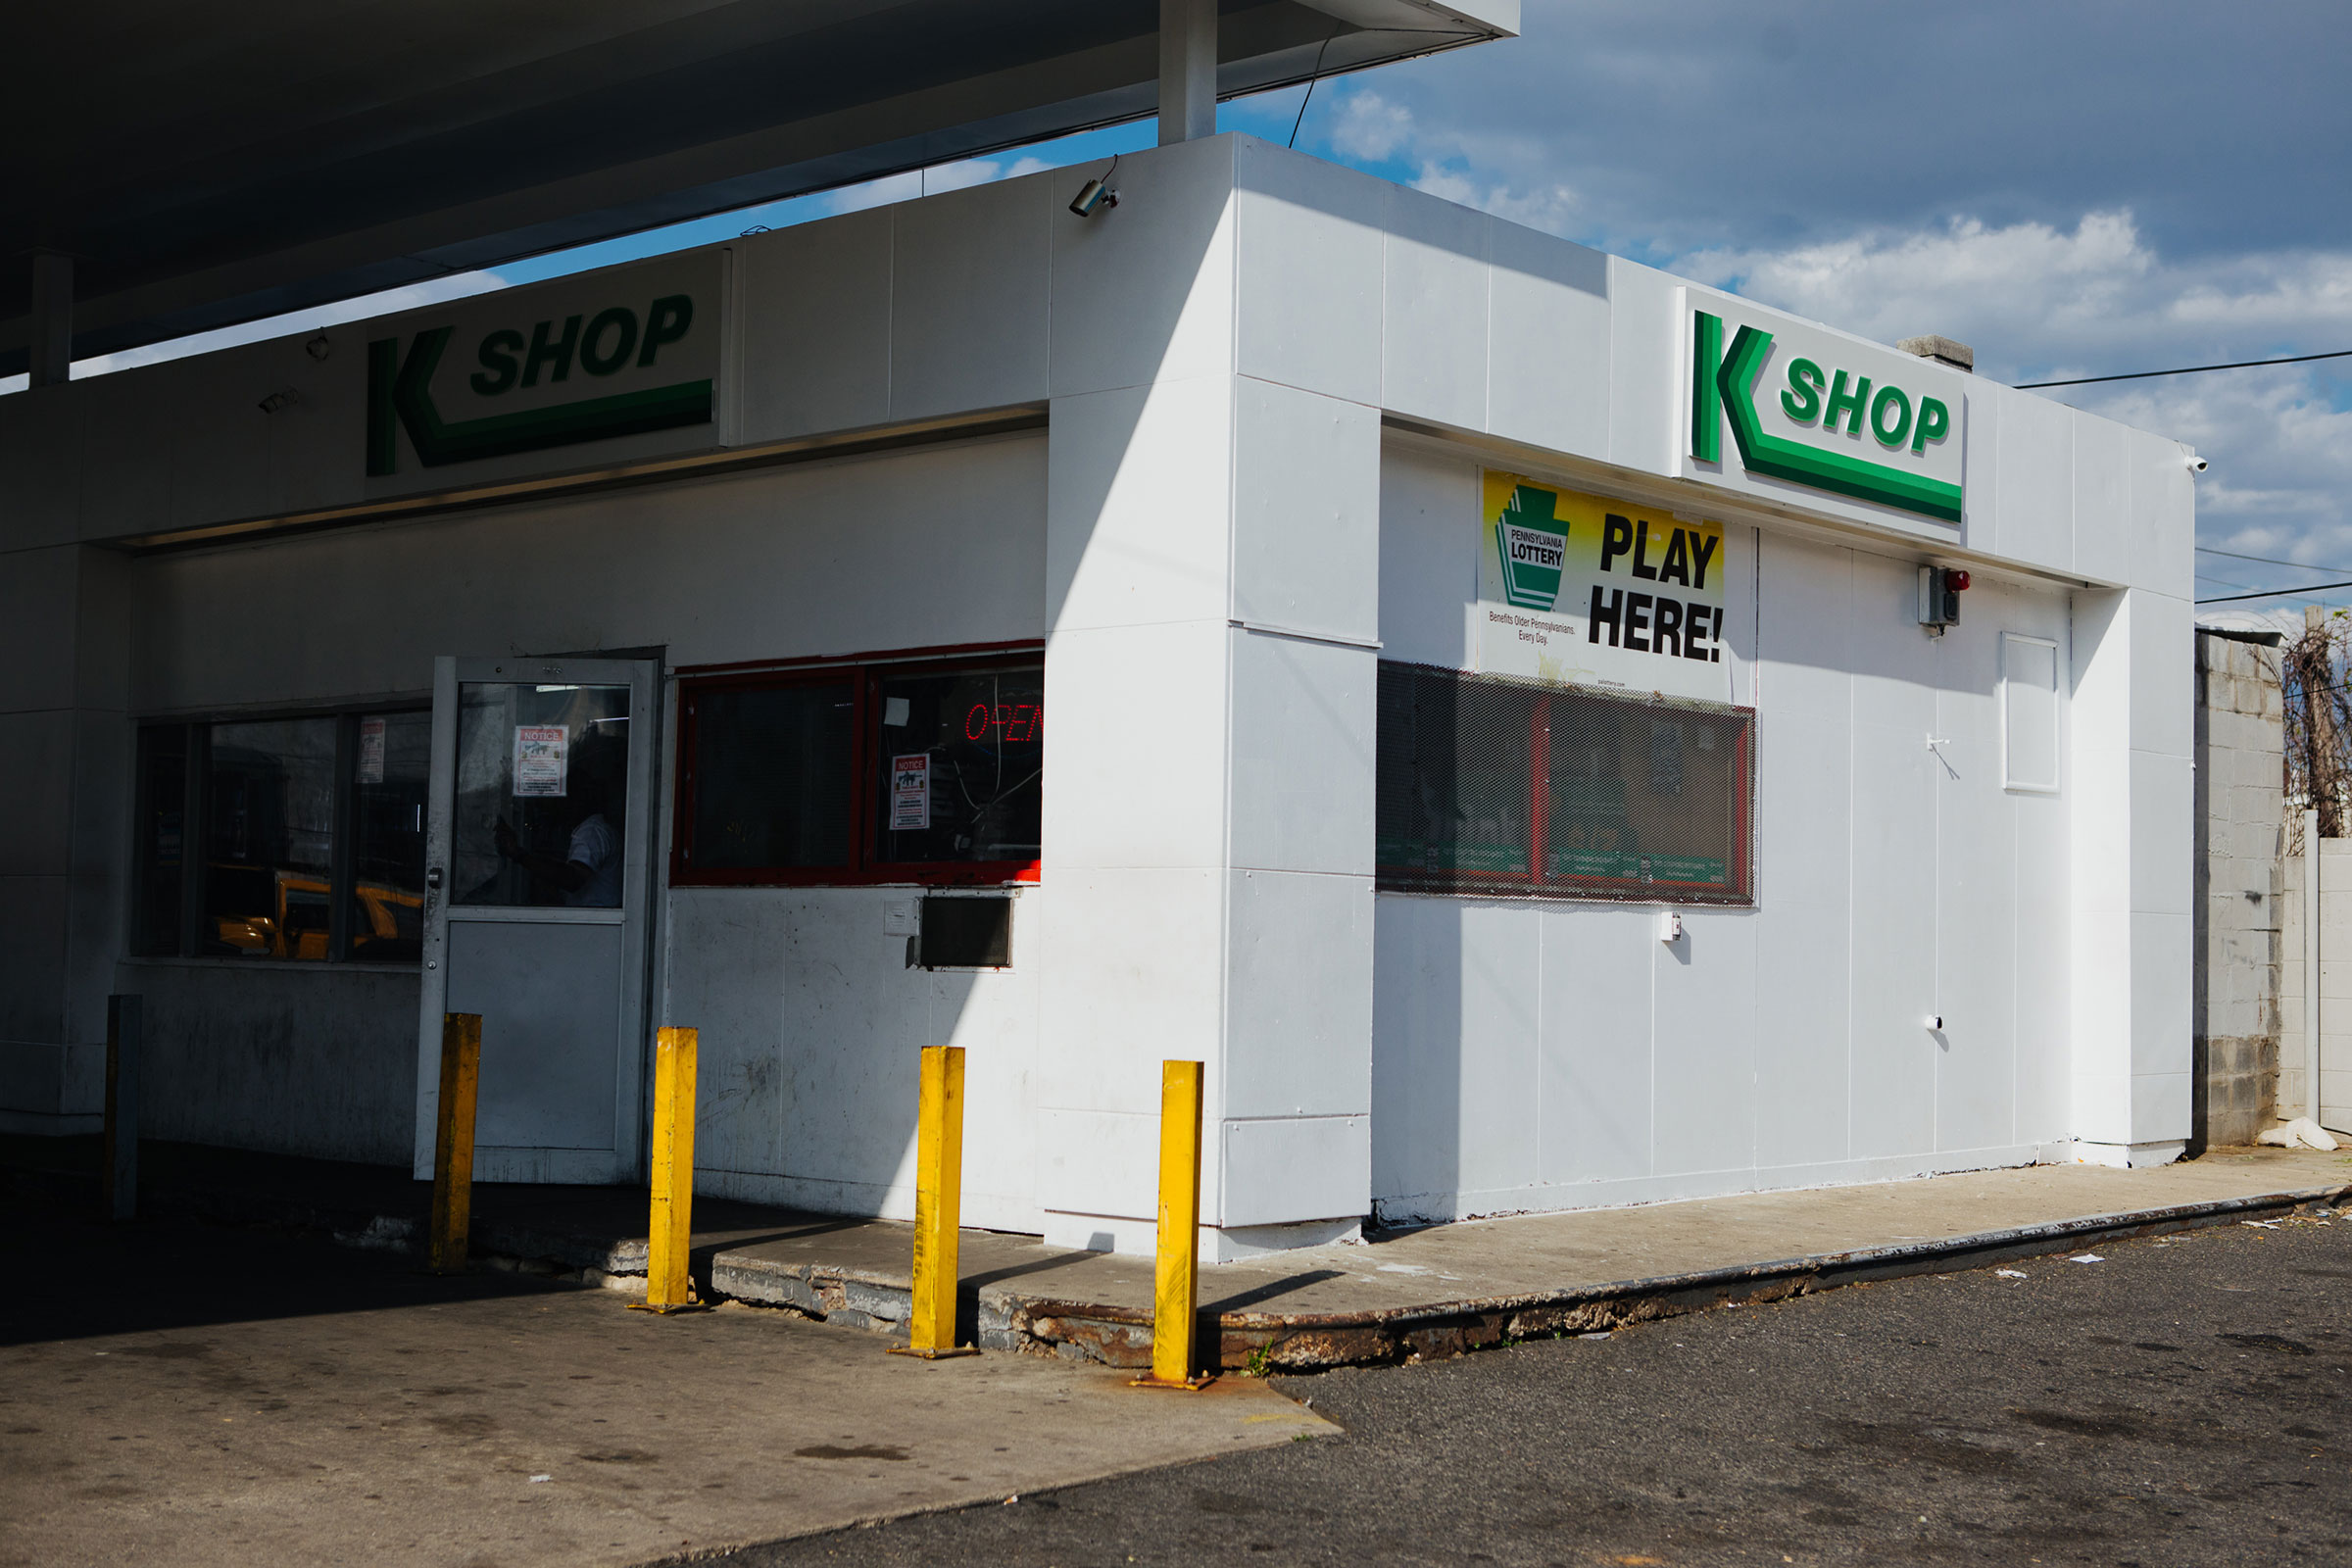 The Karco gas station is seen in North Philadelphia, Pa. (Michelle Gustafson)